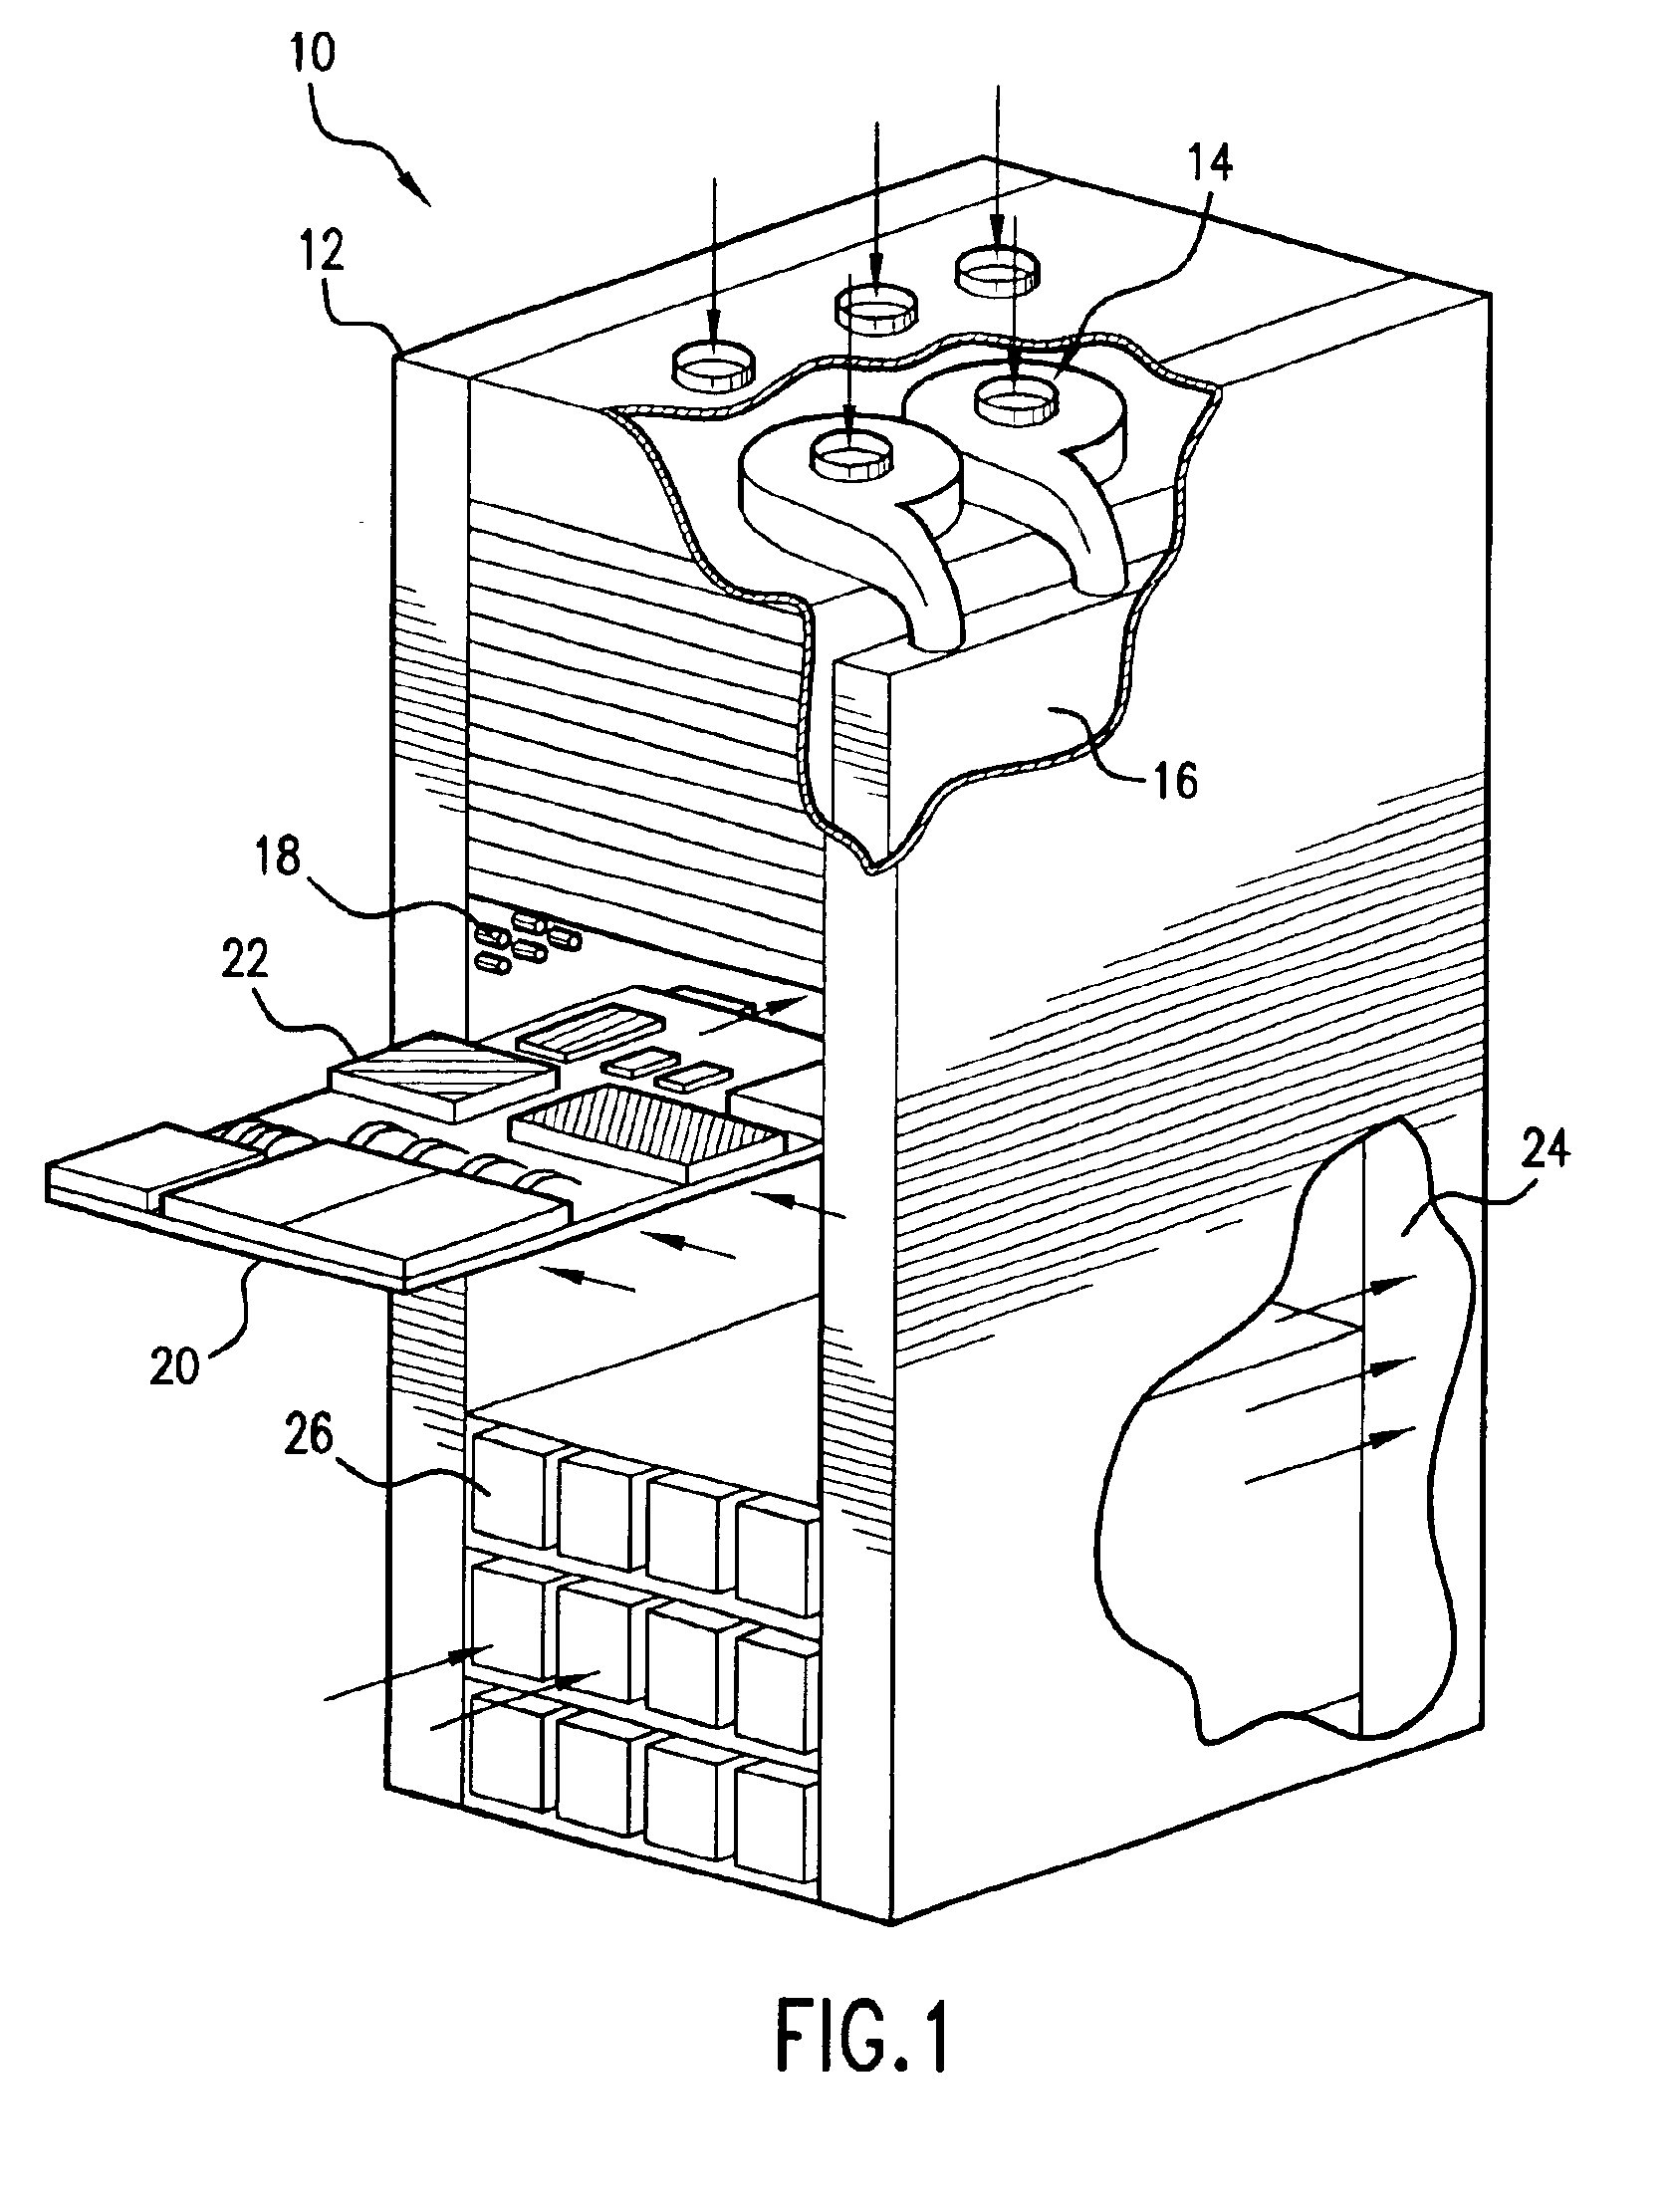 Method and apparatus for individually cooling components of electronic systems